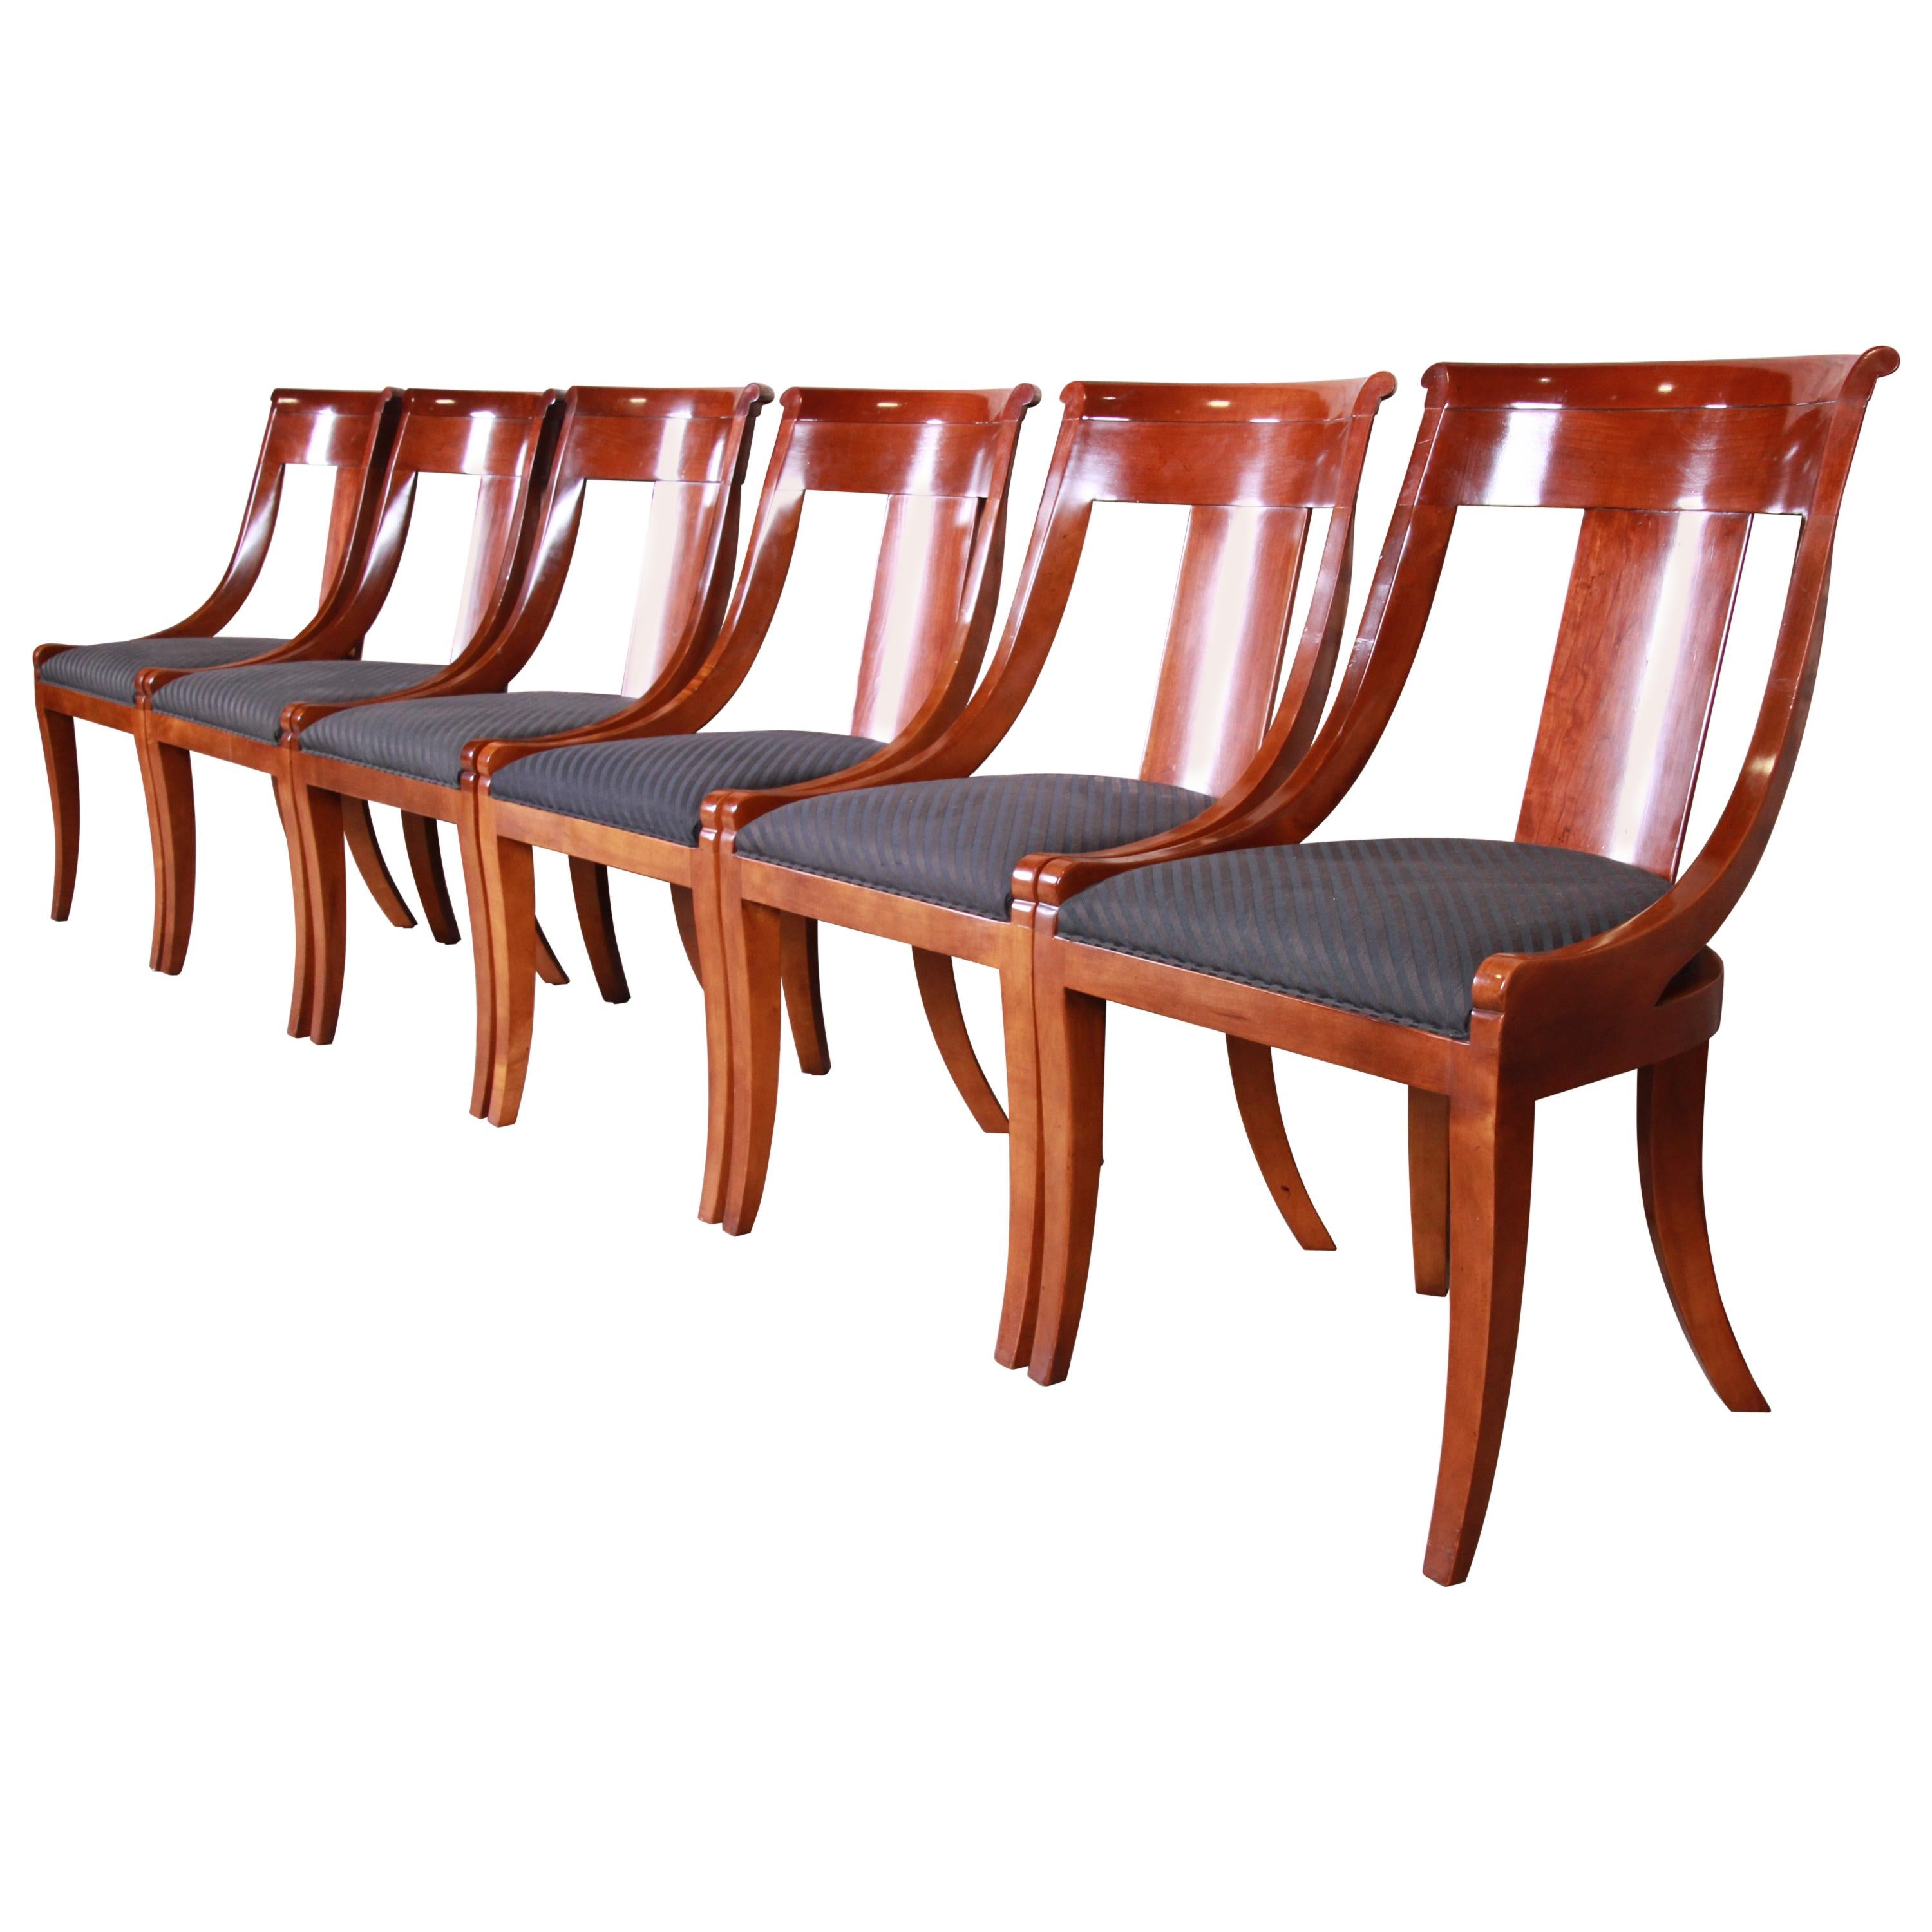 Baker Furniture Cherrywood Regency Dining Chairs, Set of Six